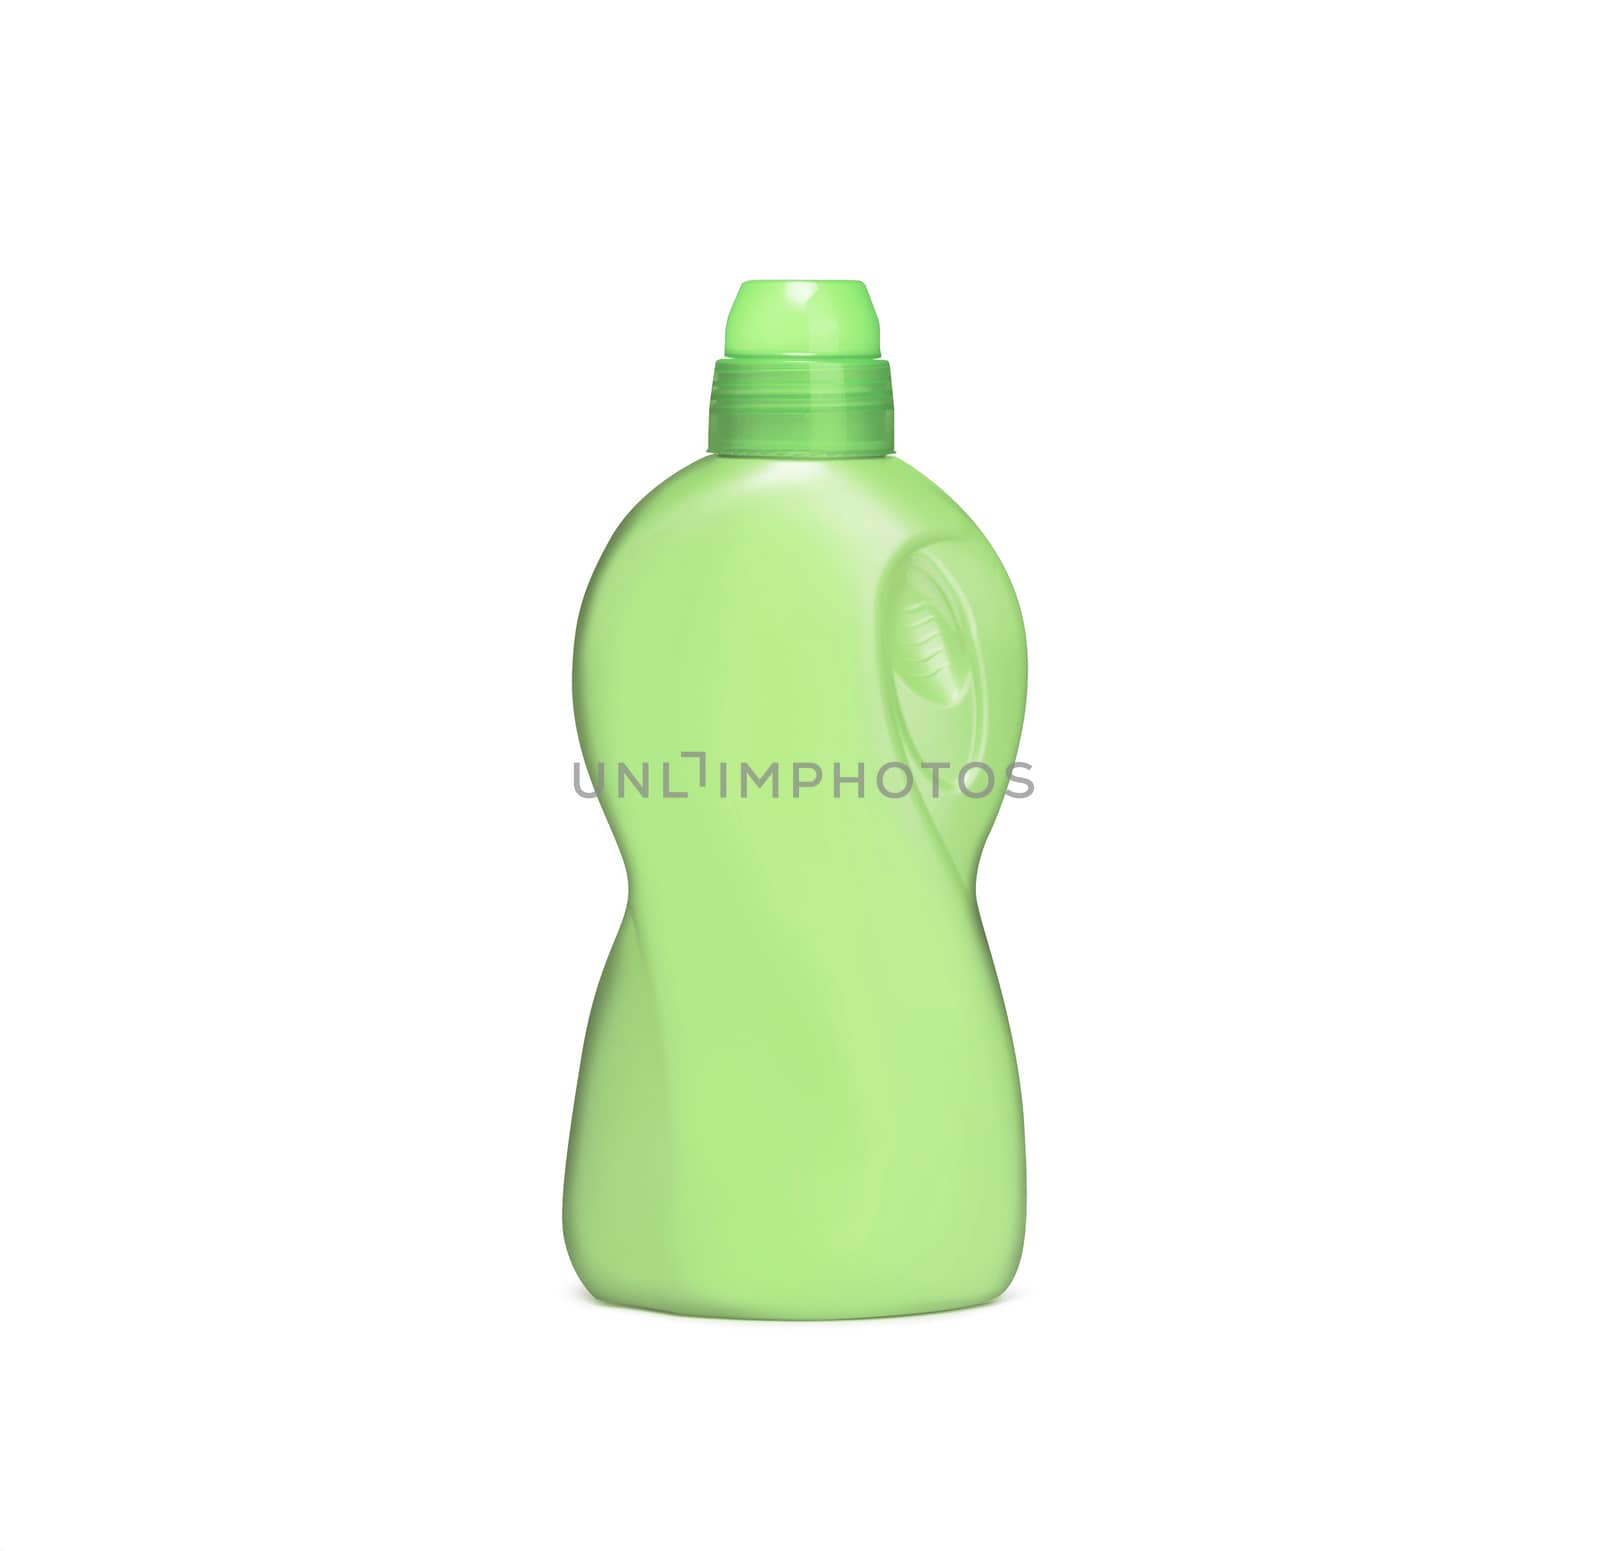 Plastic chemical bottle isolated on white background. With clipping path